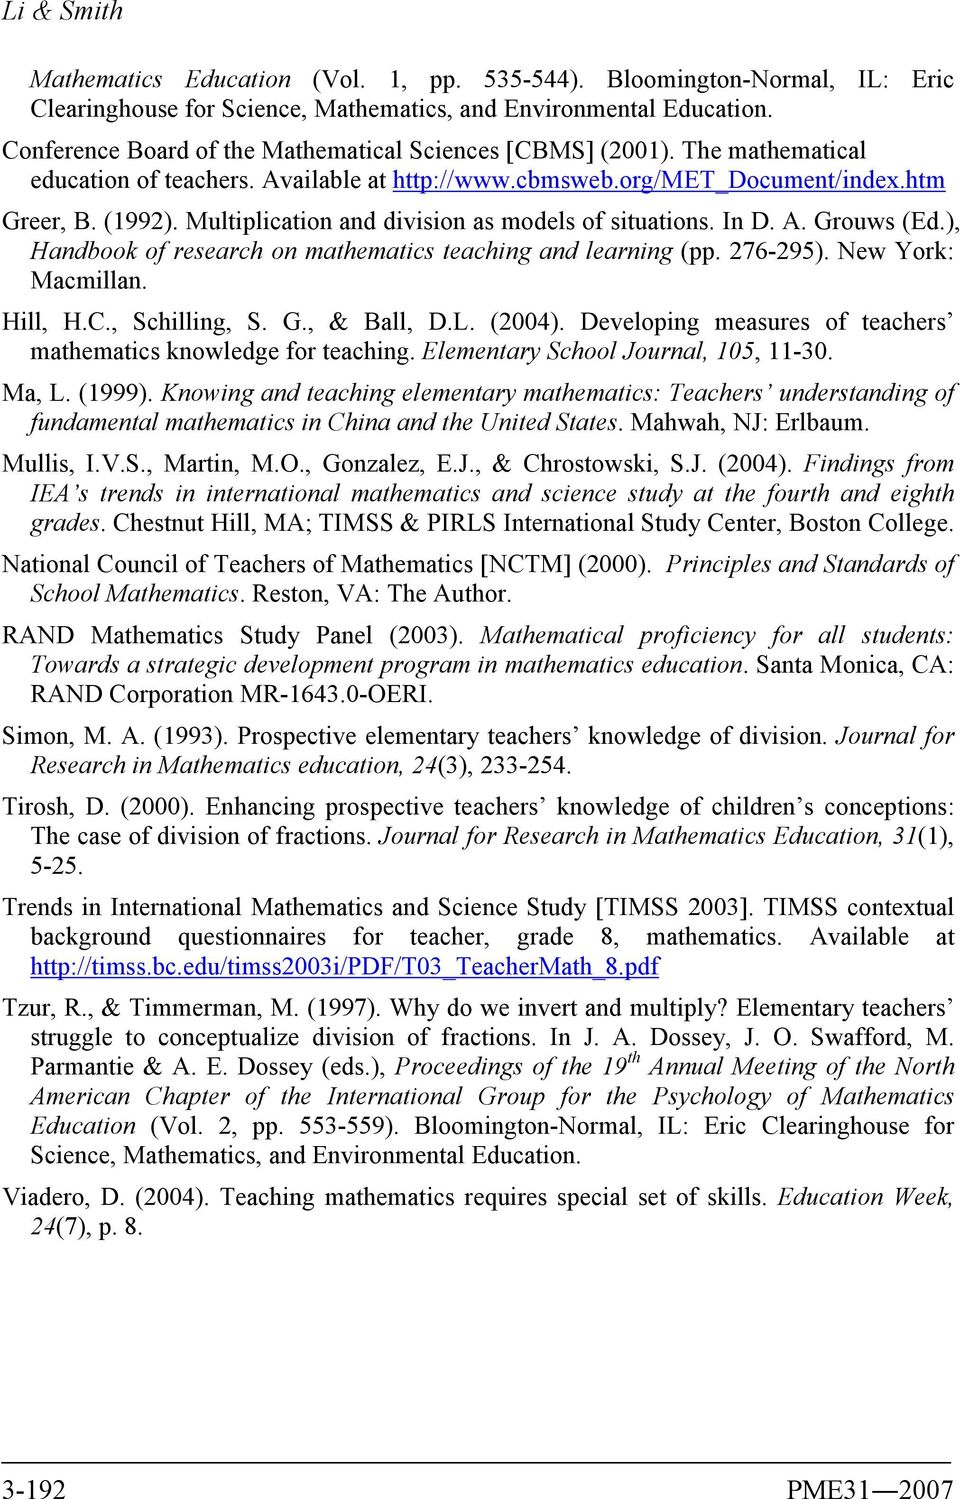 Multiplication and division as models of situations. In D. A. Grouws (Ed.), Handbook of research on mathematics teaching and learning (pp. 276-295). New York: Macmillan. Hill, H.C., Schilling, S. G., & Ball, D.